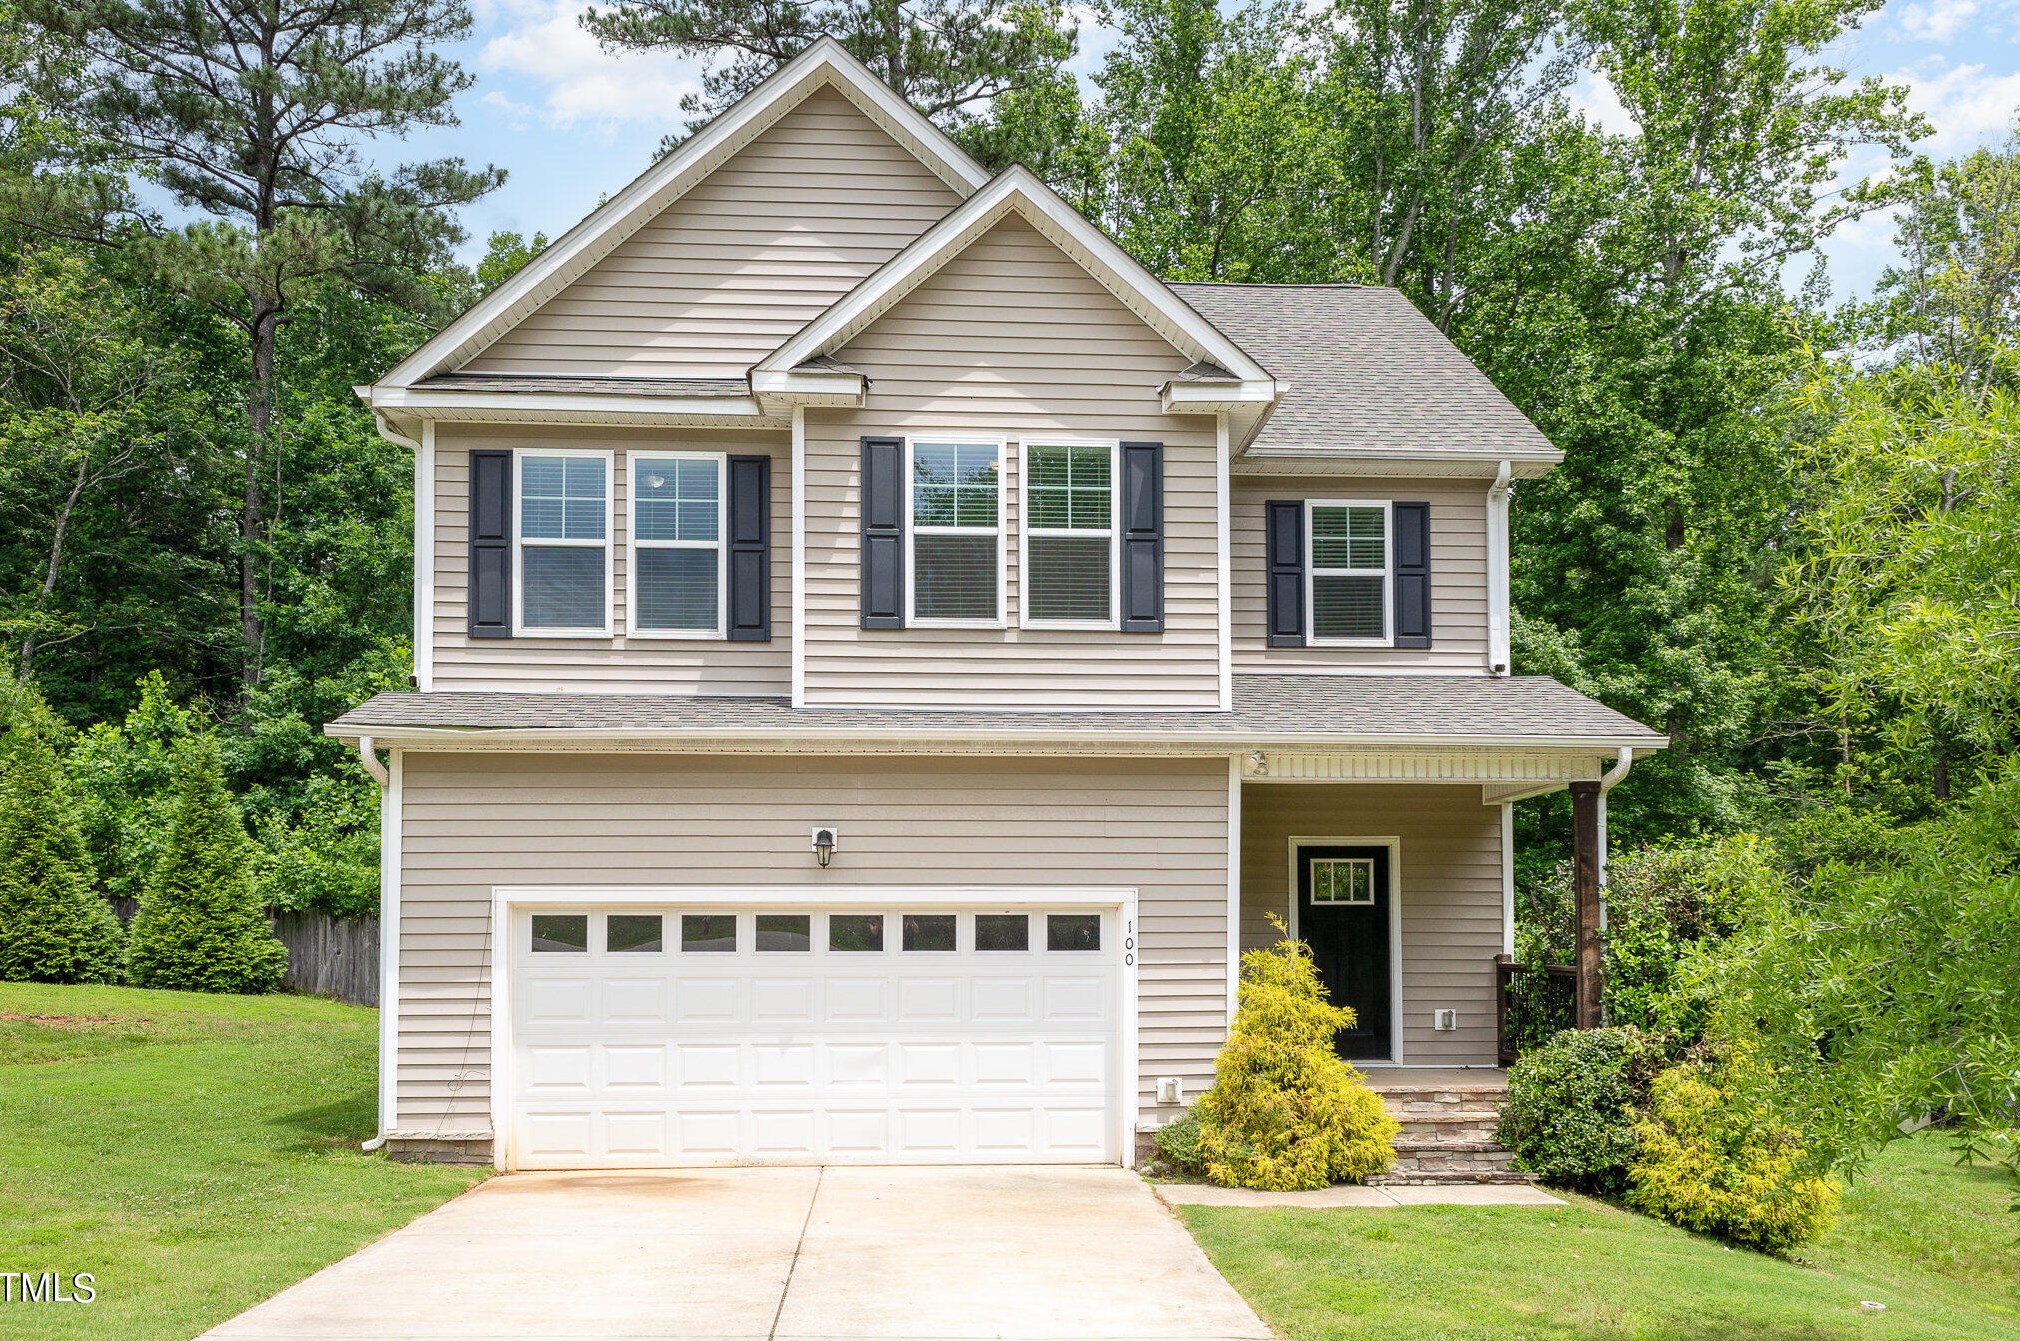 100 Alcock Ln, Youngsville, NC 27596